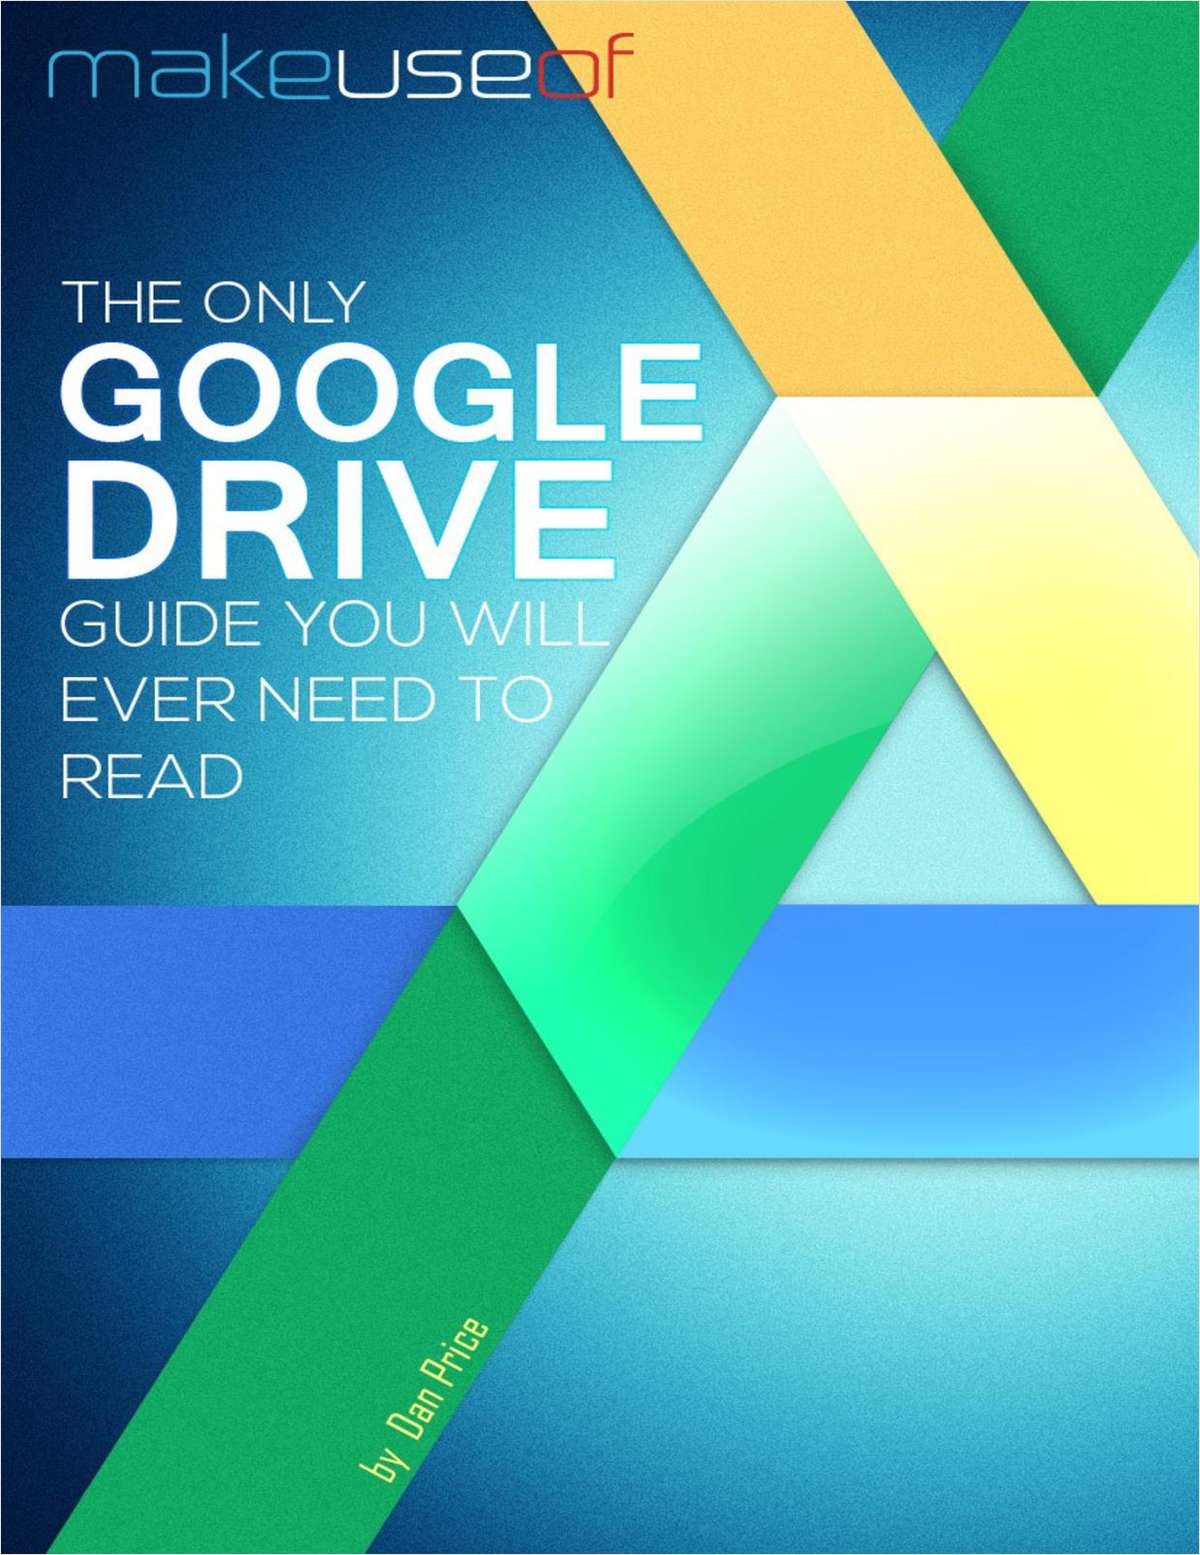 The Only Google Drive Guide You'll Ever Need to Read